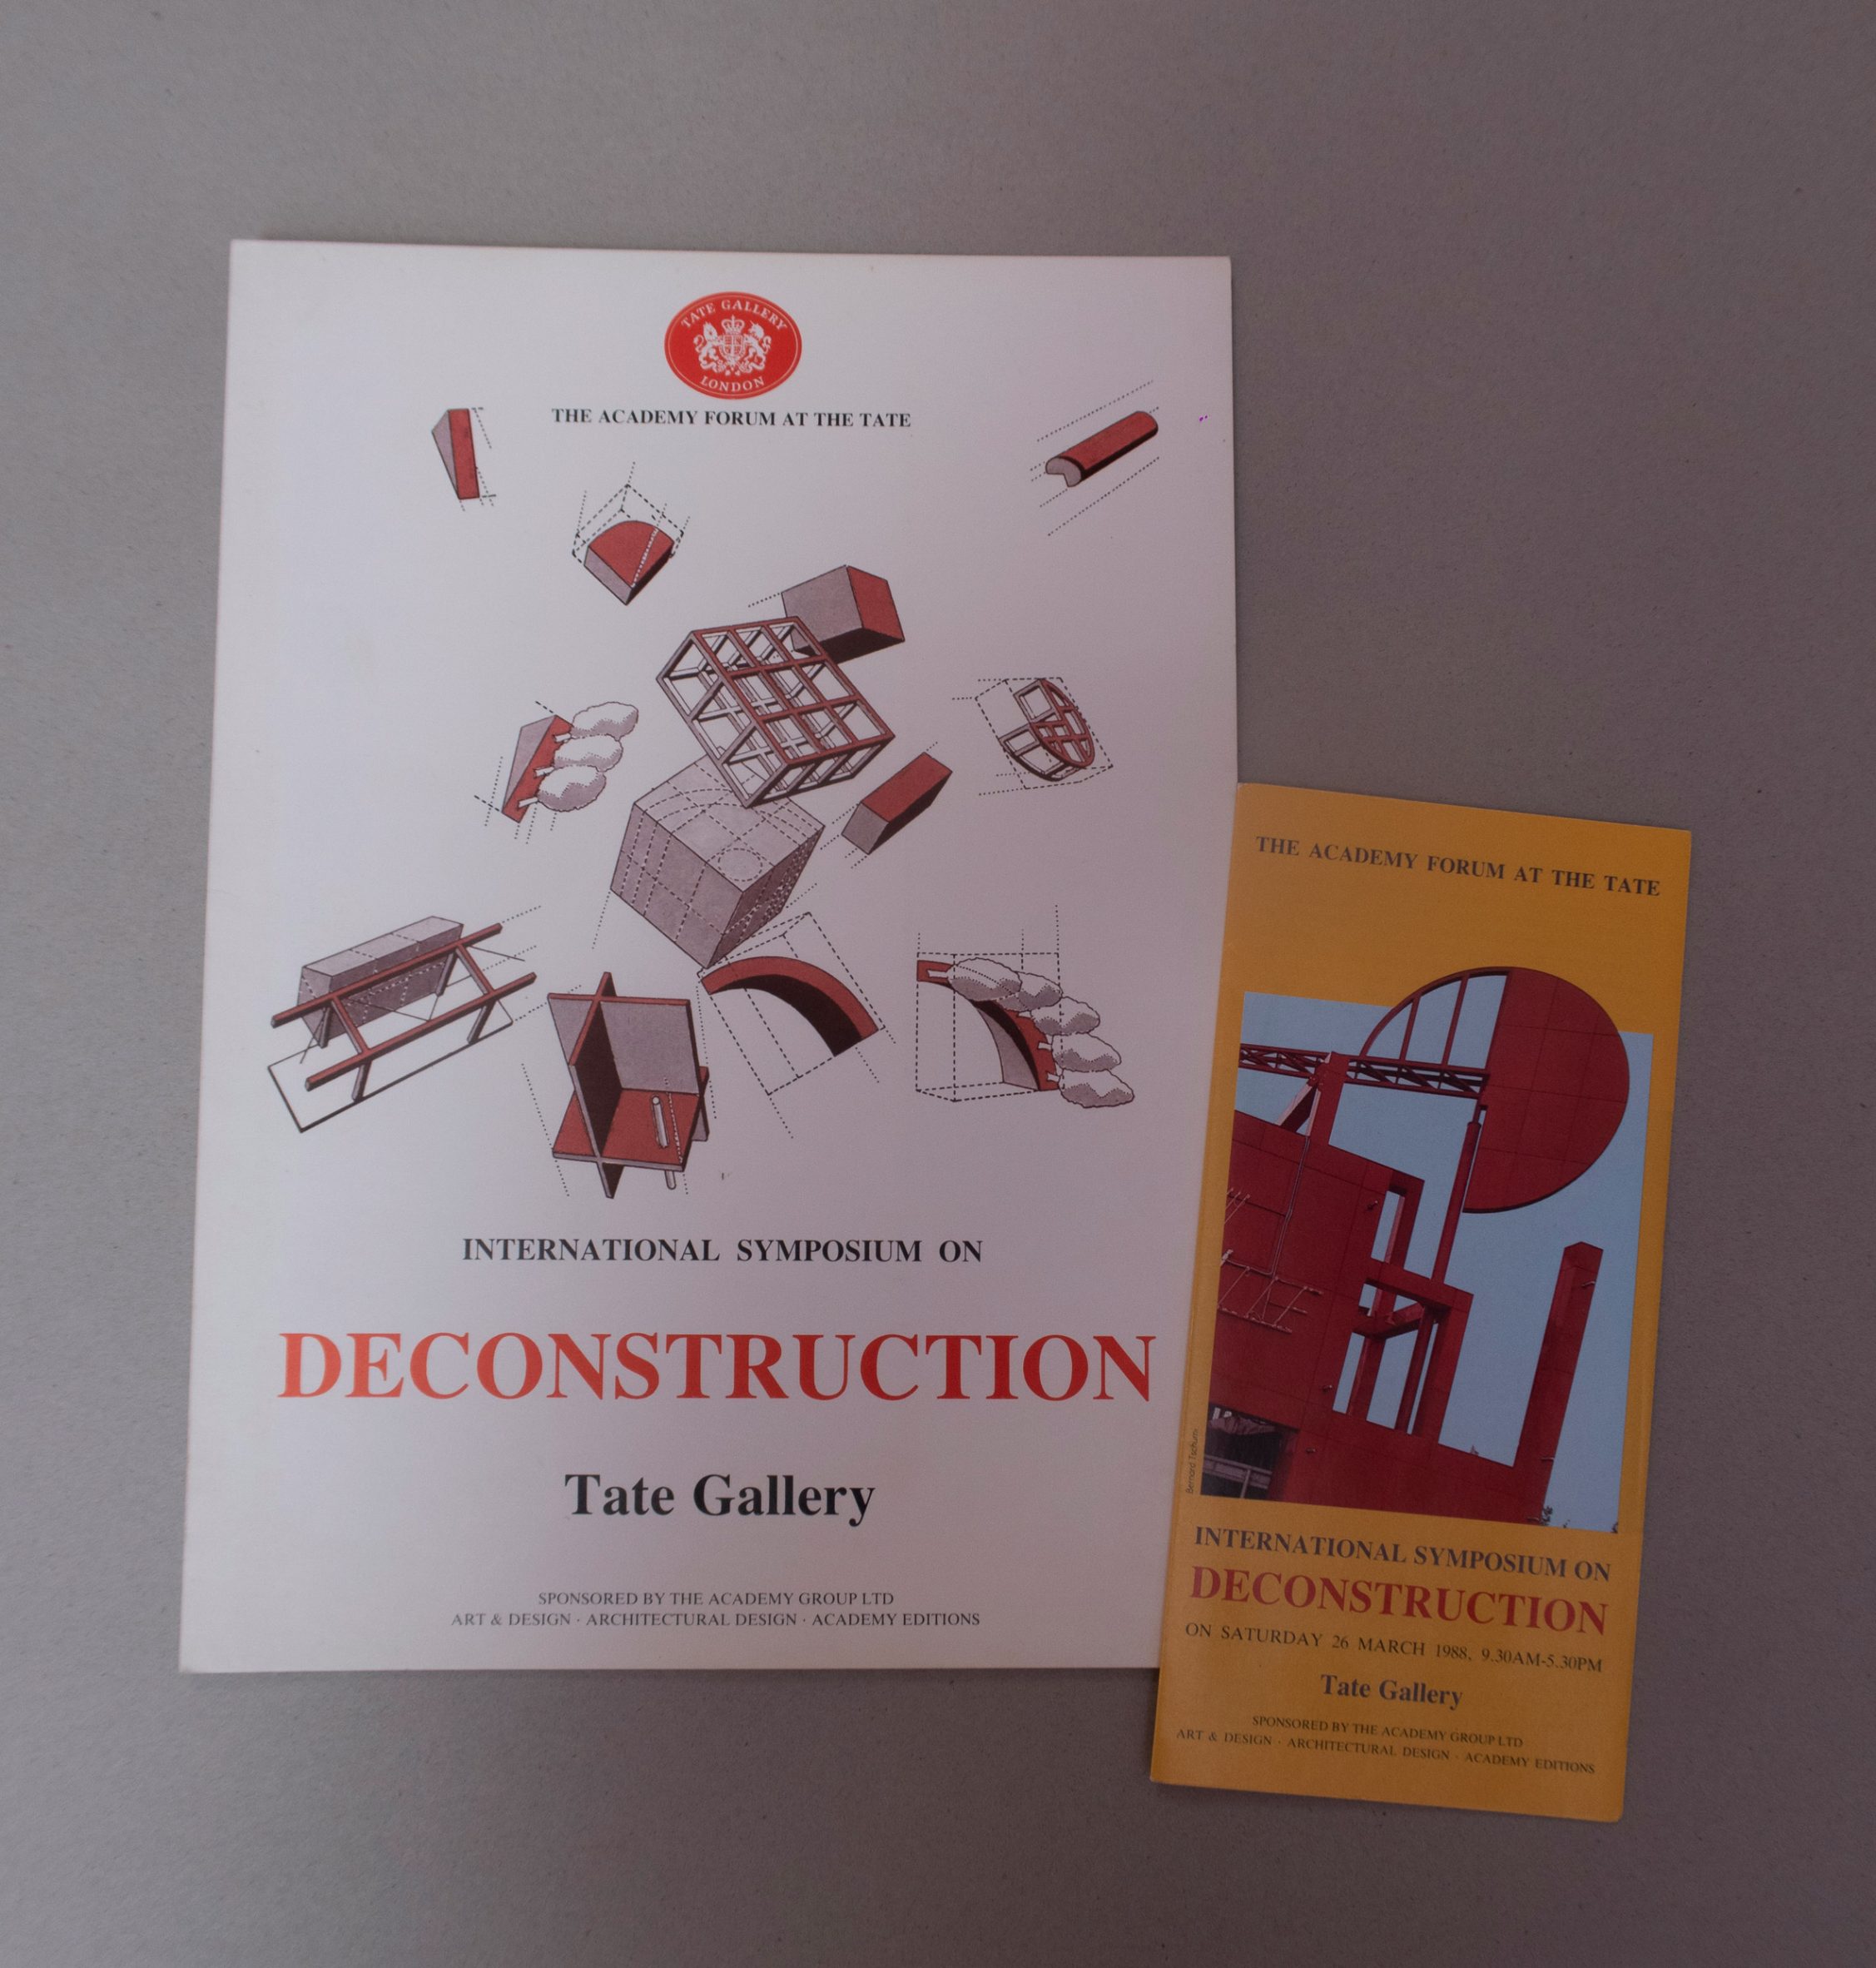 Deconstruction at the Tate Gallery